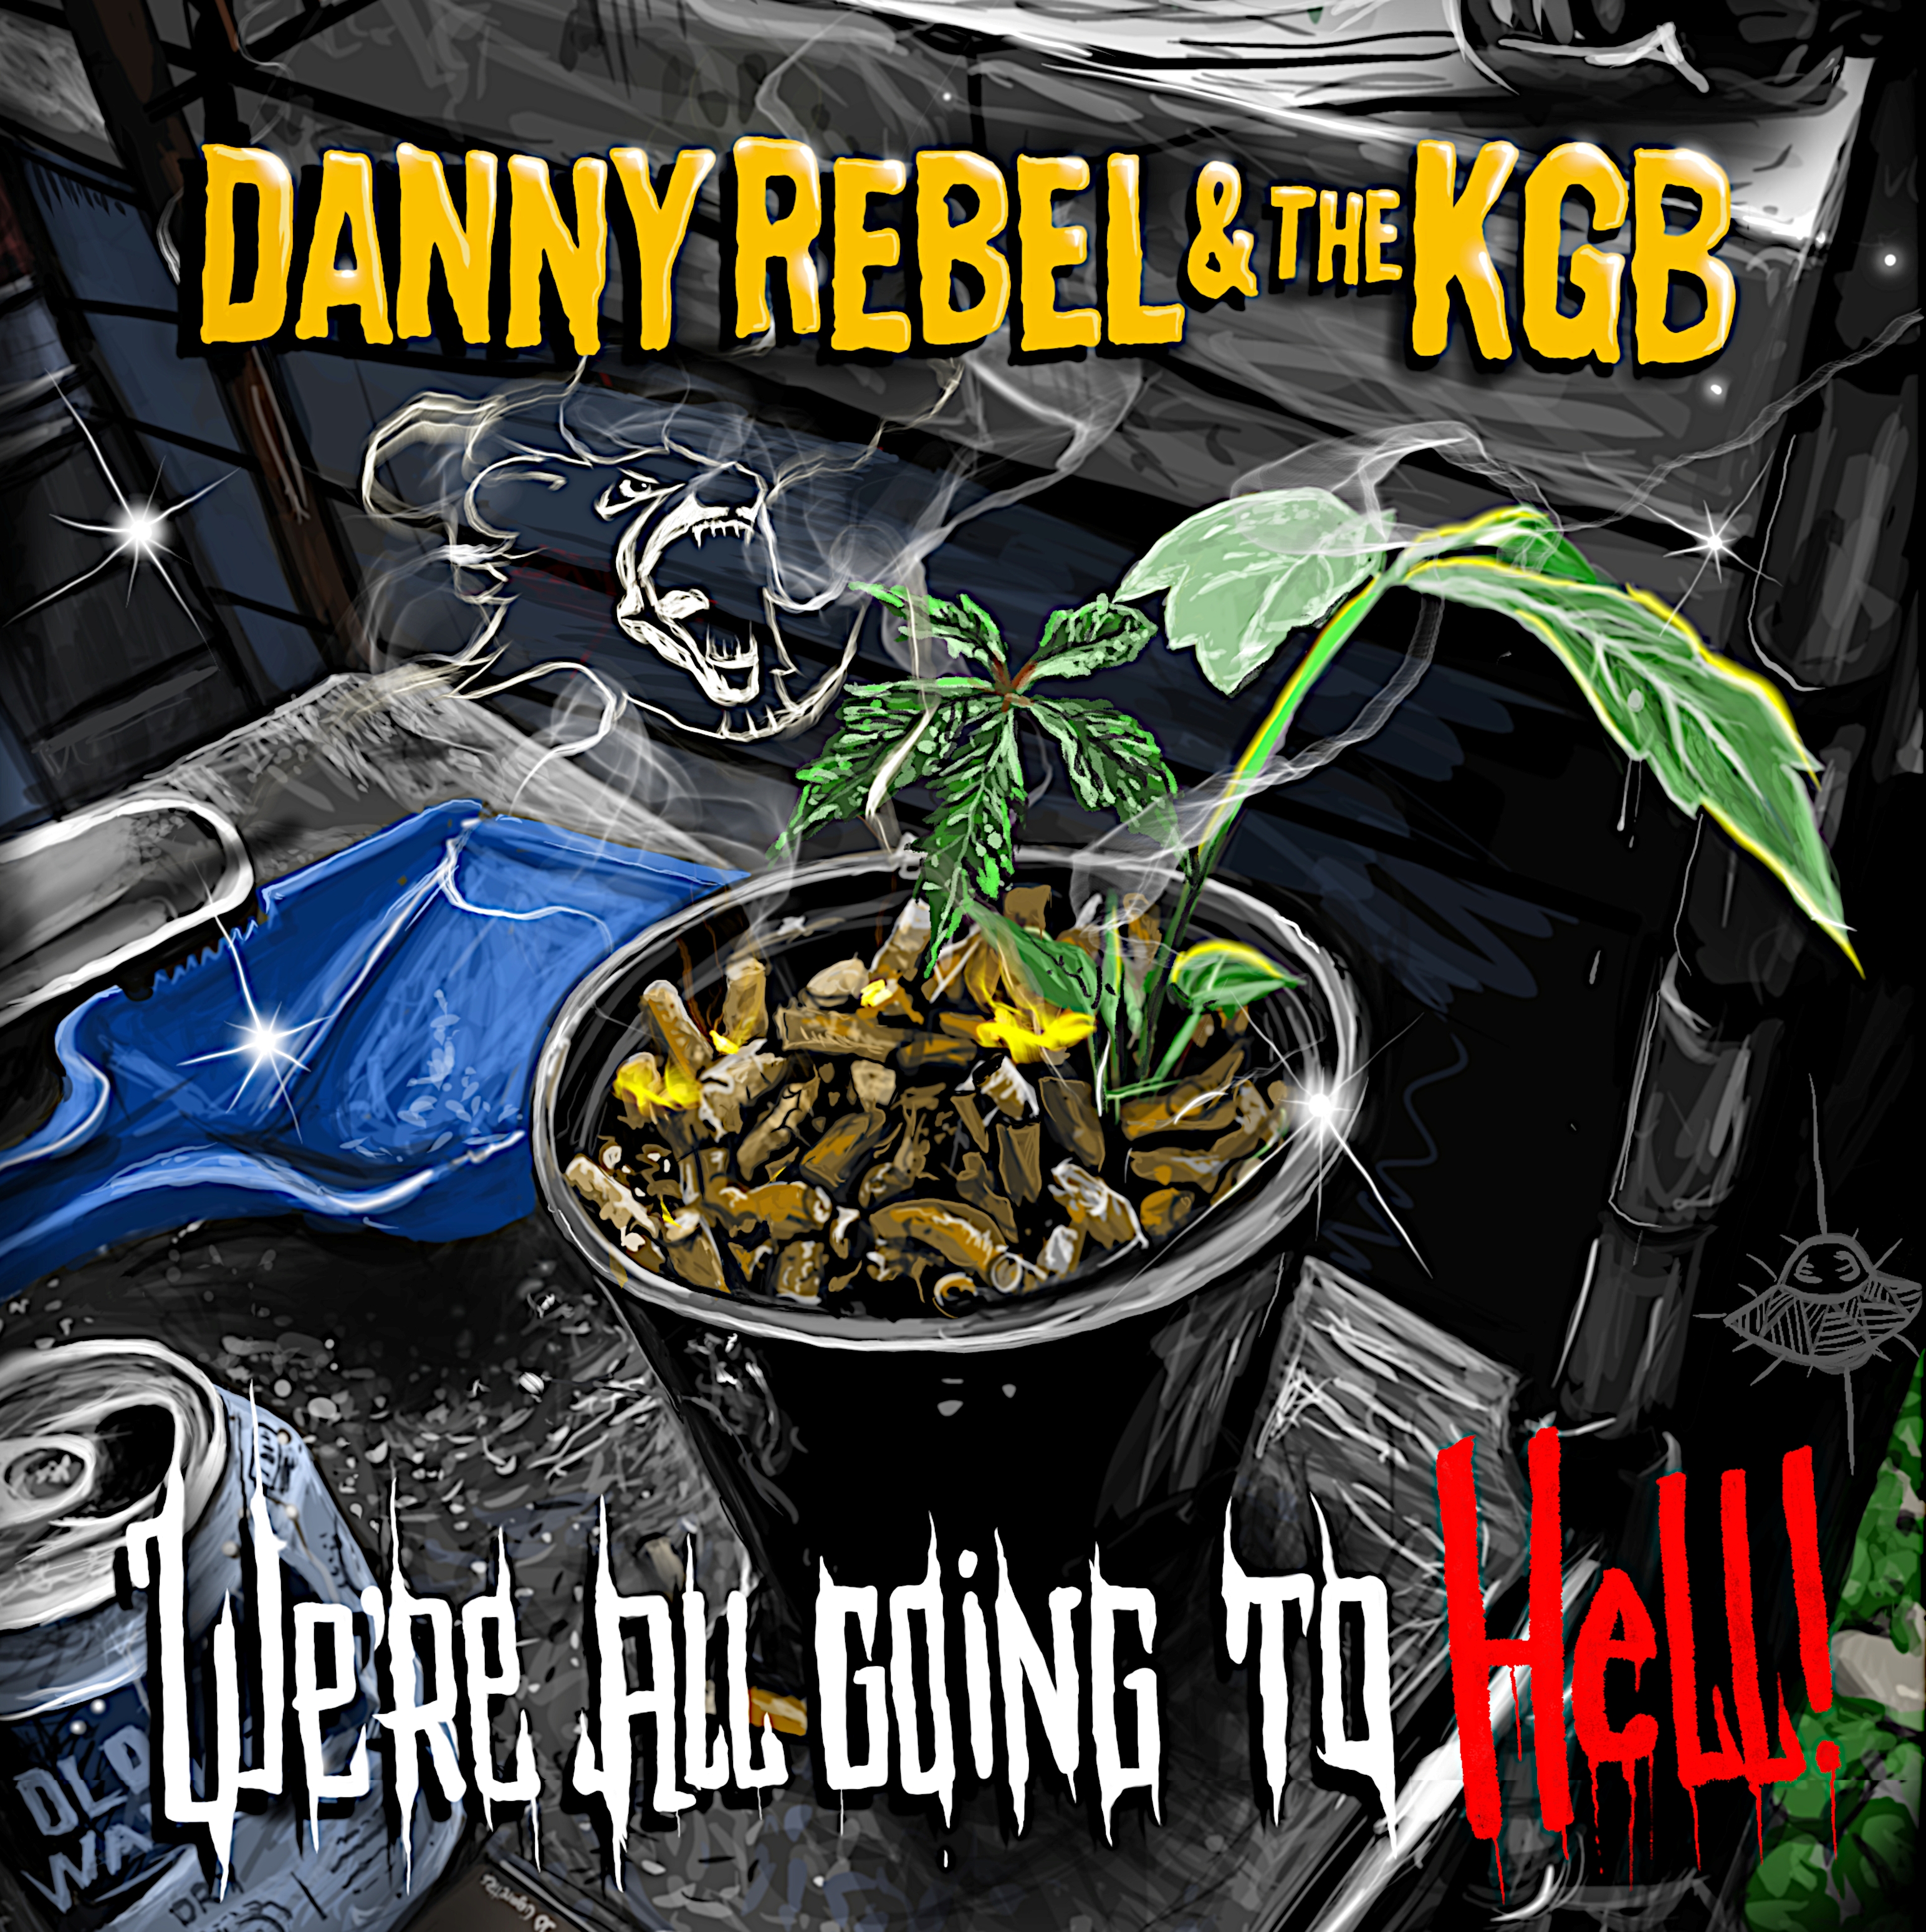 Danny Rebel & The KGB/WE'RE ALL GOING LP